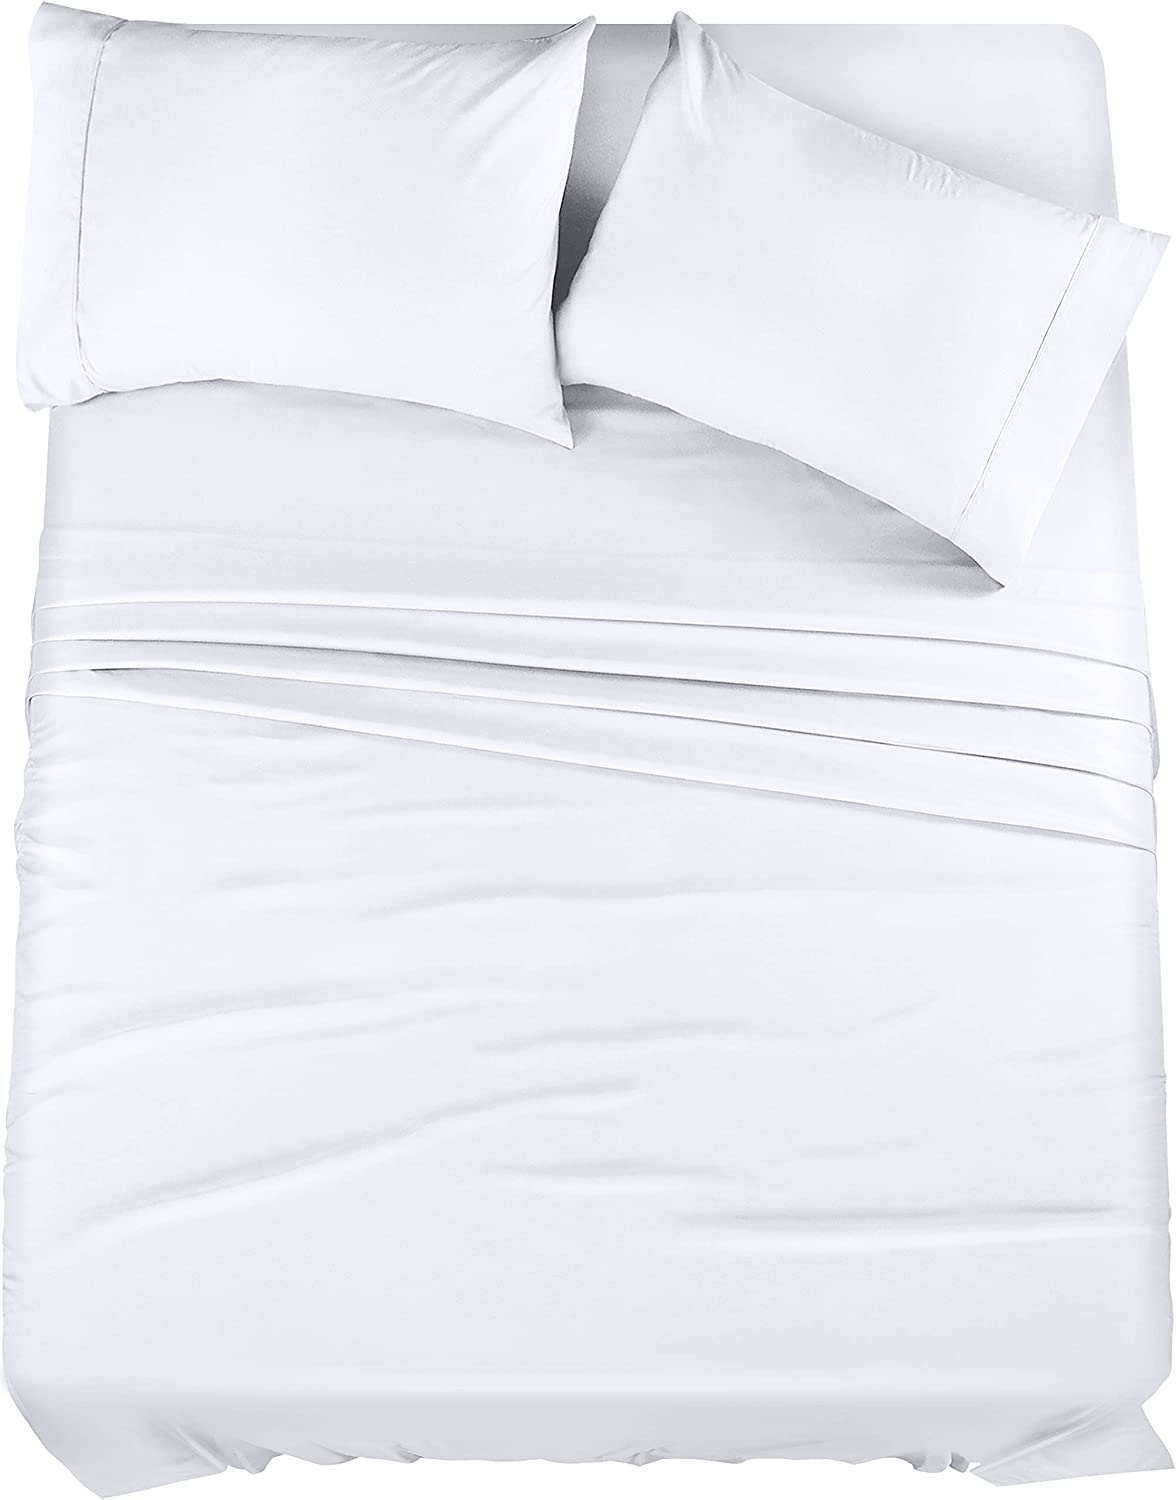 Utopia Bedding Twin Bed Sheets Set - 3 Piece Bedding - Brushed Microfiber - Shrinkage and Fade Resistant - Easy Care (Twin, White)